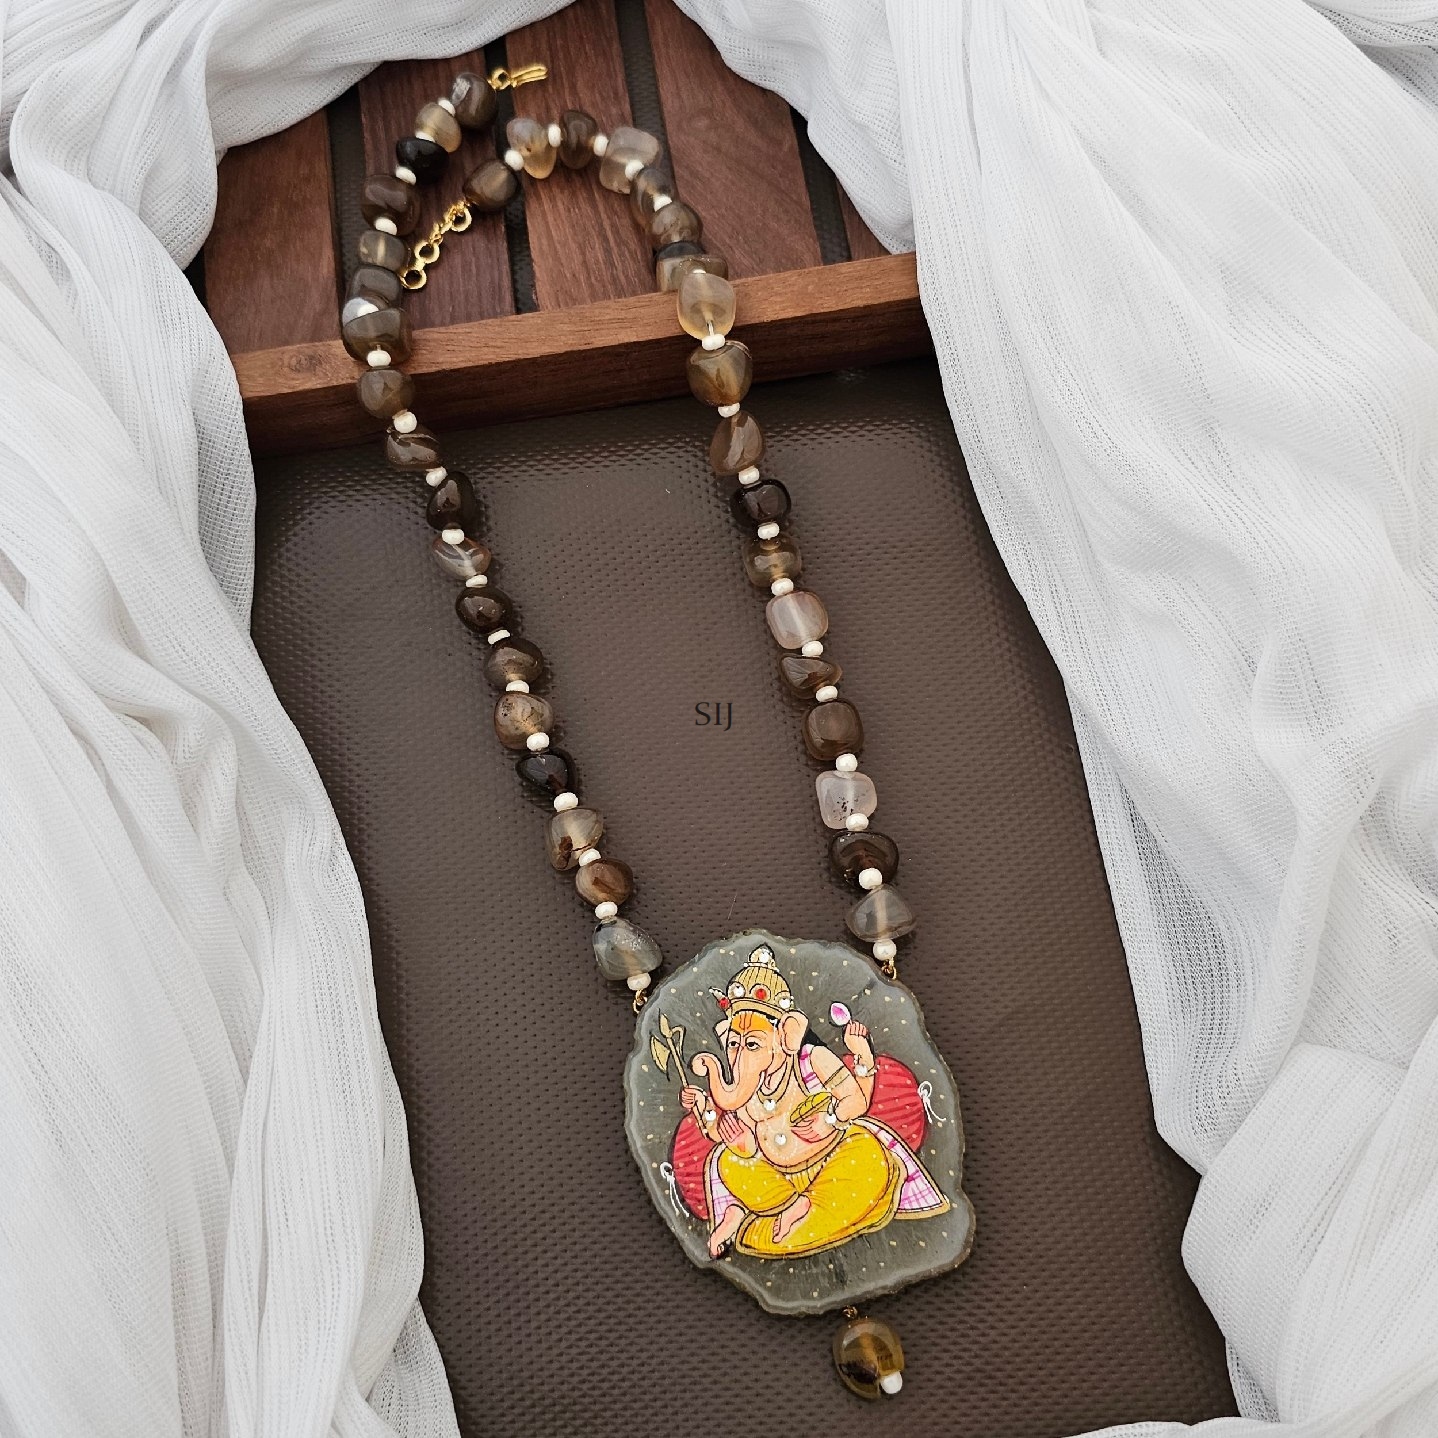 The Ganesh pendant, revered in Hinduism, adorns this necklace alongside brown and white beads. Symbolizing wisdom and remover of obstacles, Ganesh brings blessings. Crafted with care, this pendant necklace exudes spiritual significance and aesthetic charm. Wear it with reverence or as a fashion statement, carrying the essence of divine protection.